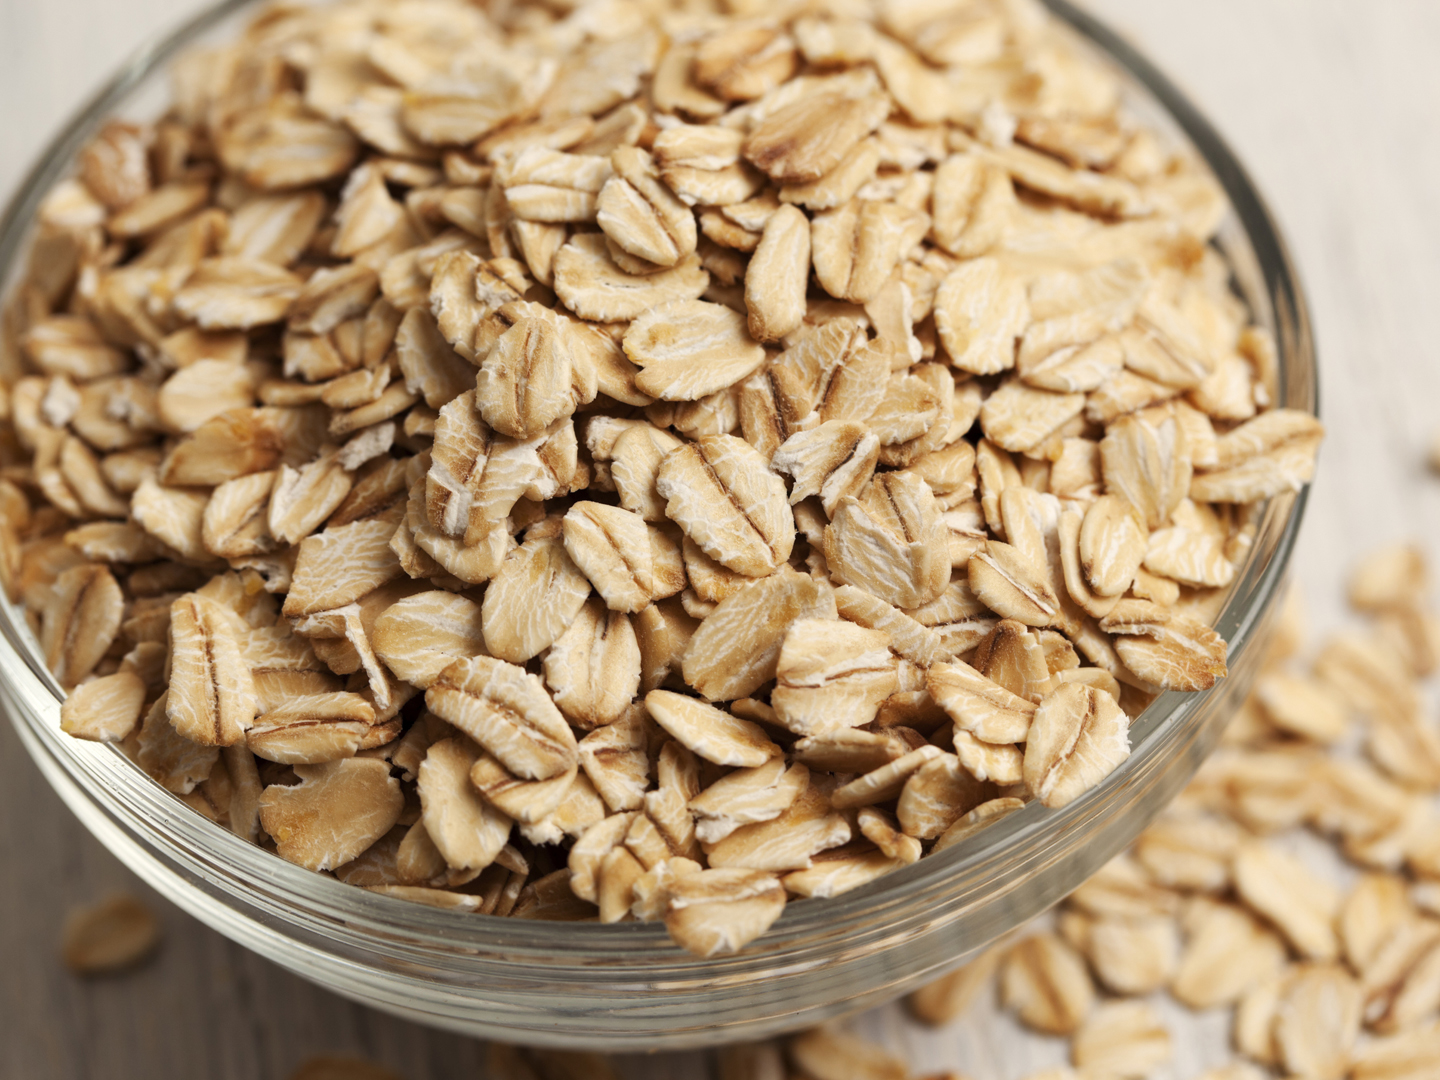 Cooking With Grains: Oats - Dr. Weil's Healthy Kitchen